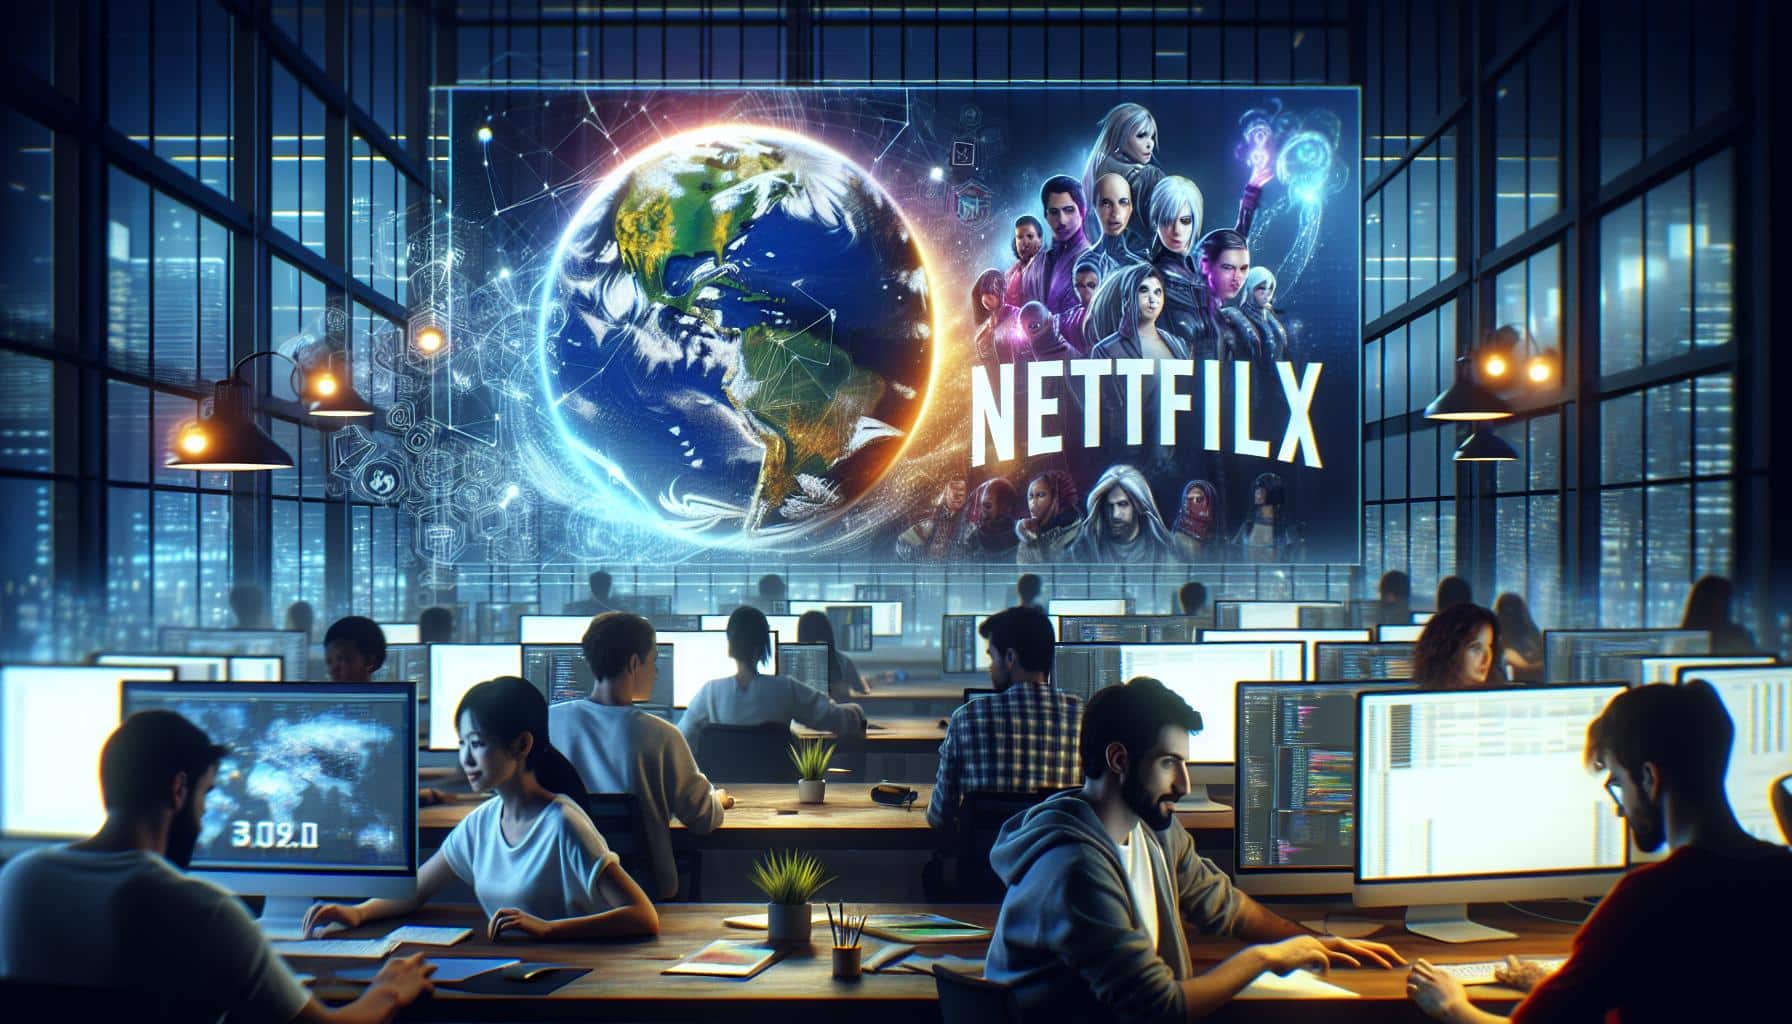 Atlus Developing Games for Netflix Platform, According to Claims | FinOracle